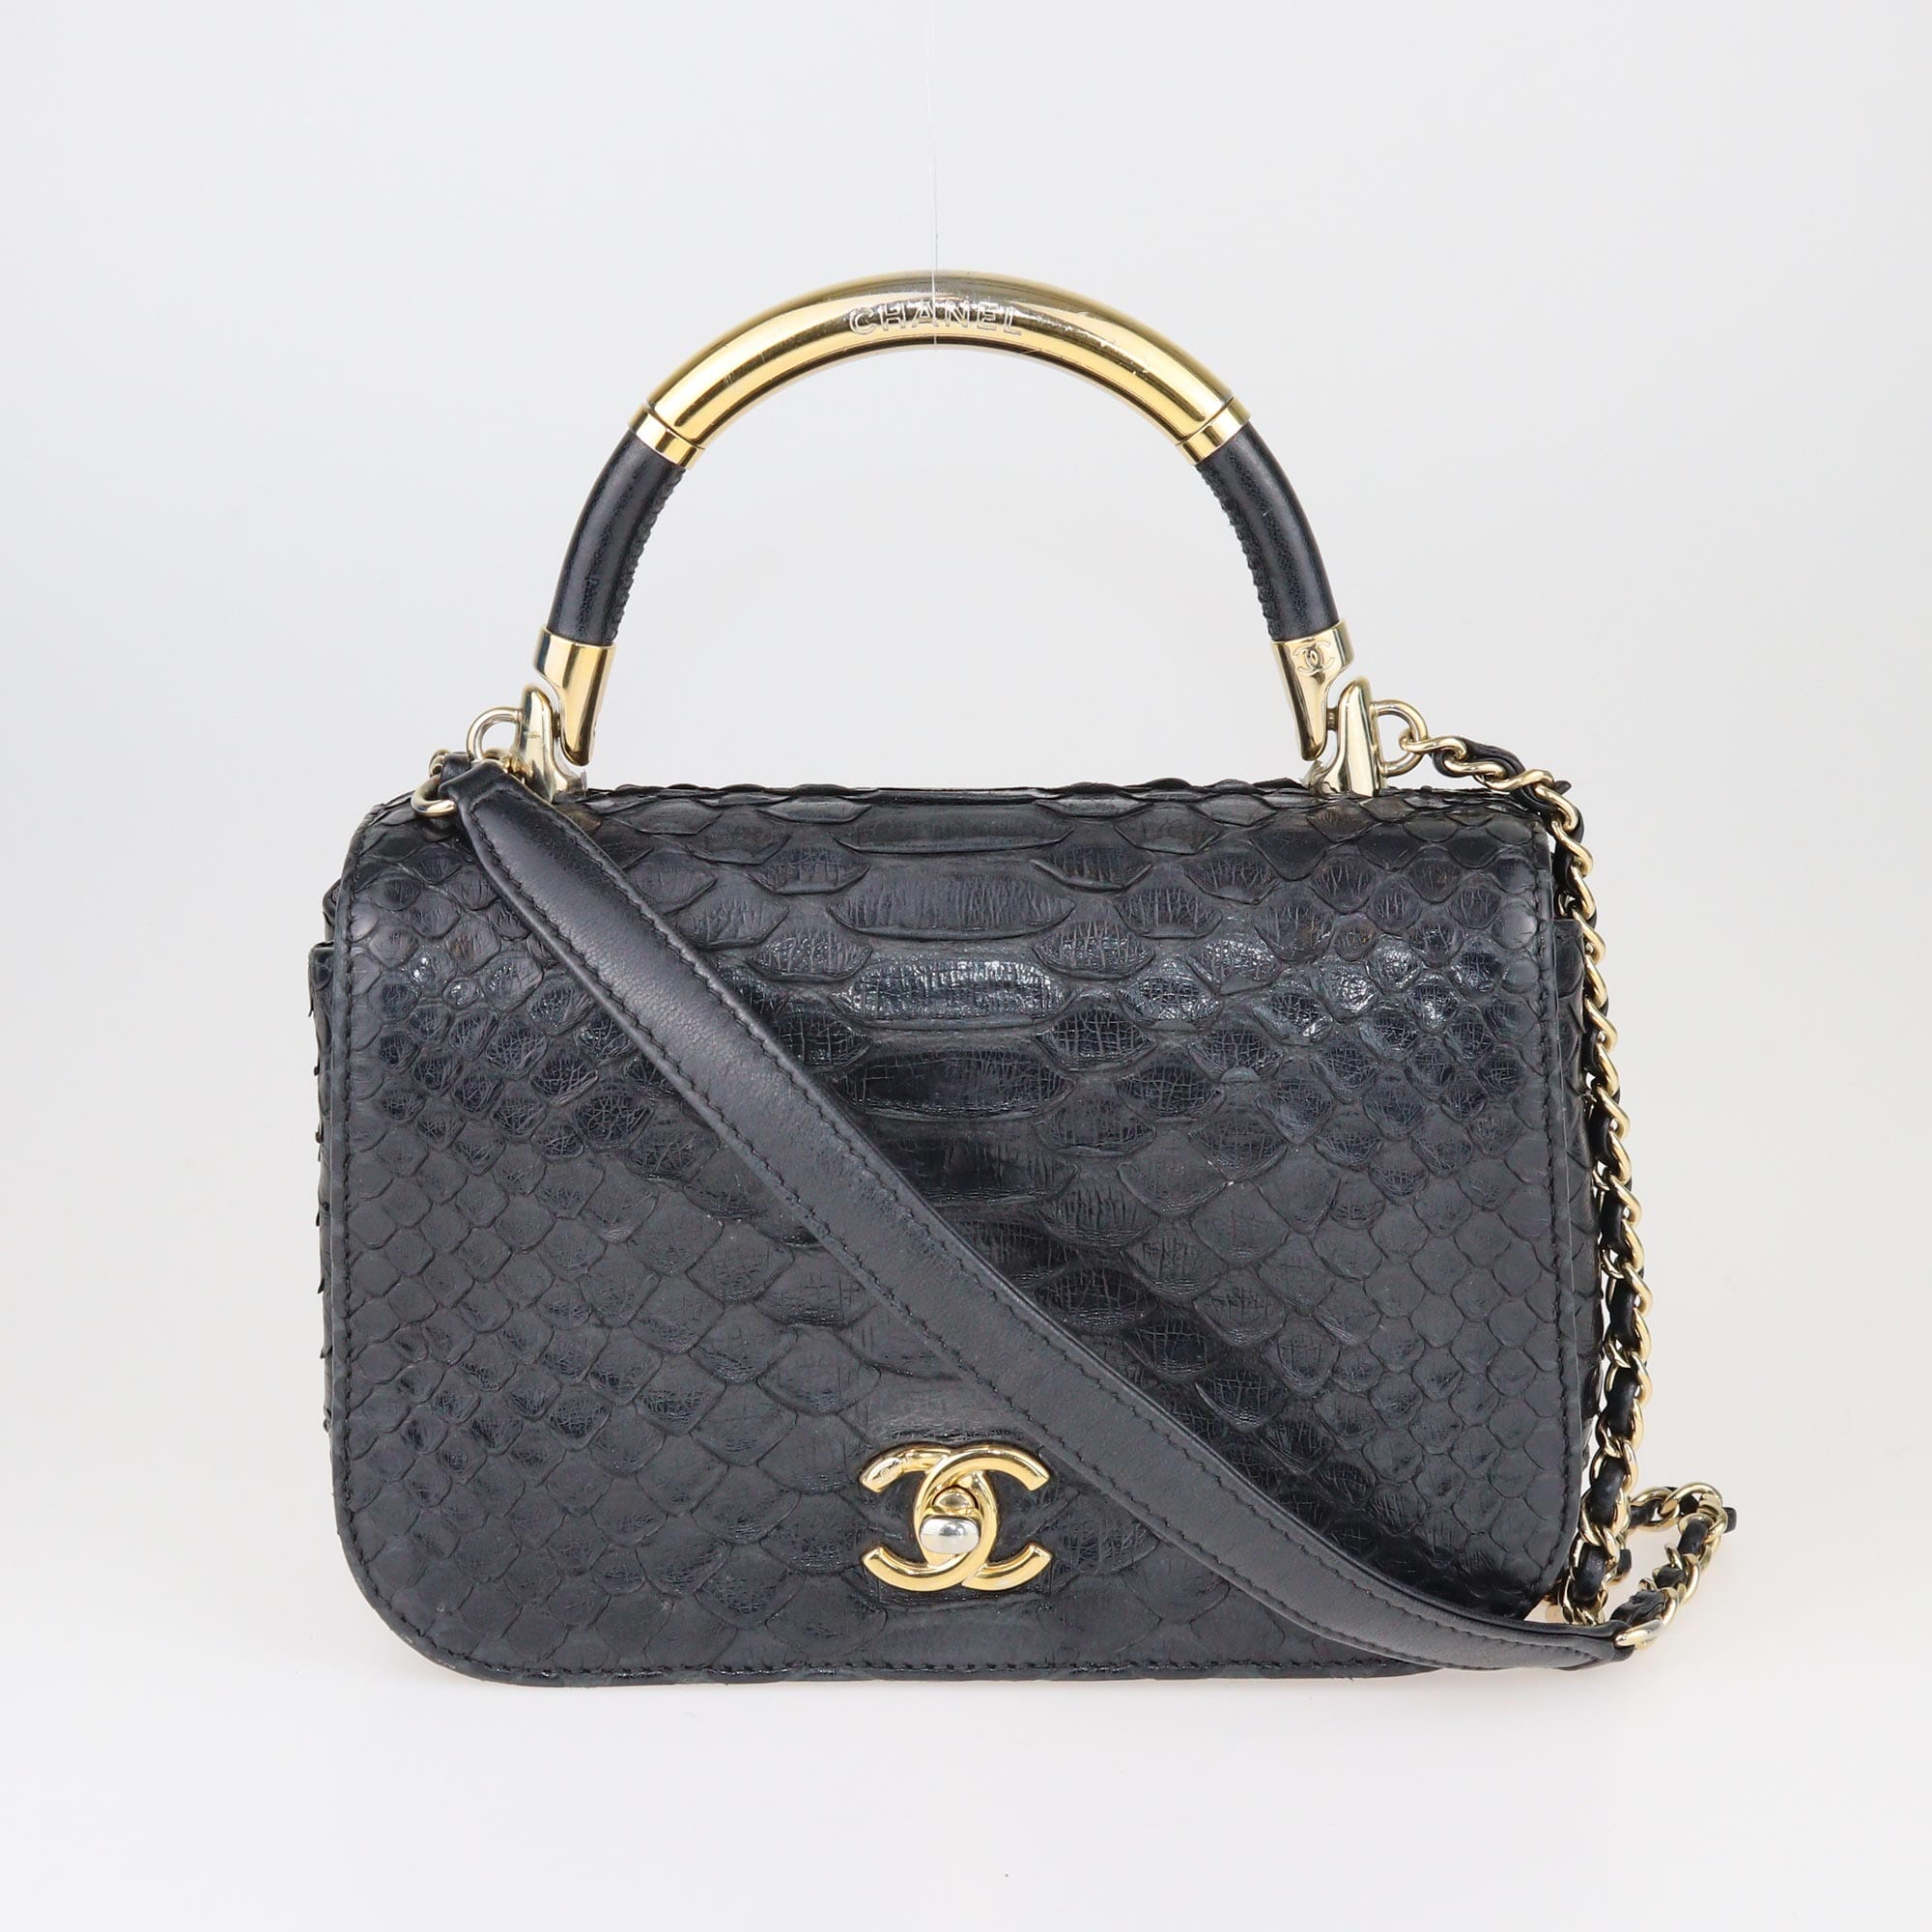 Chanel Black Small Carry Chic Bag Crossbody Bags Chanel 